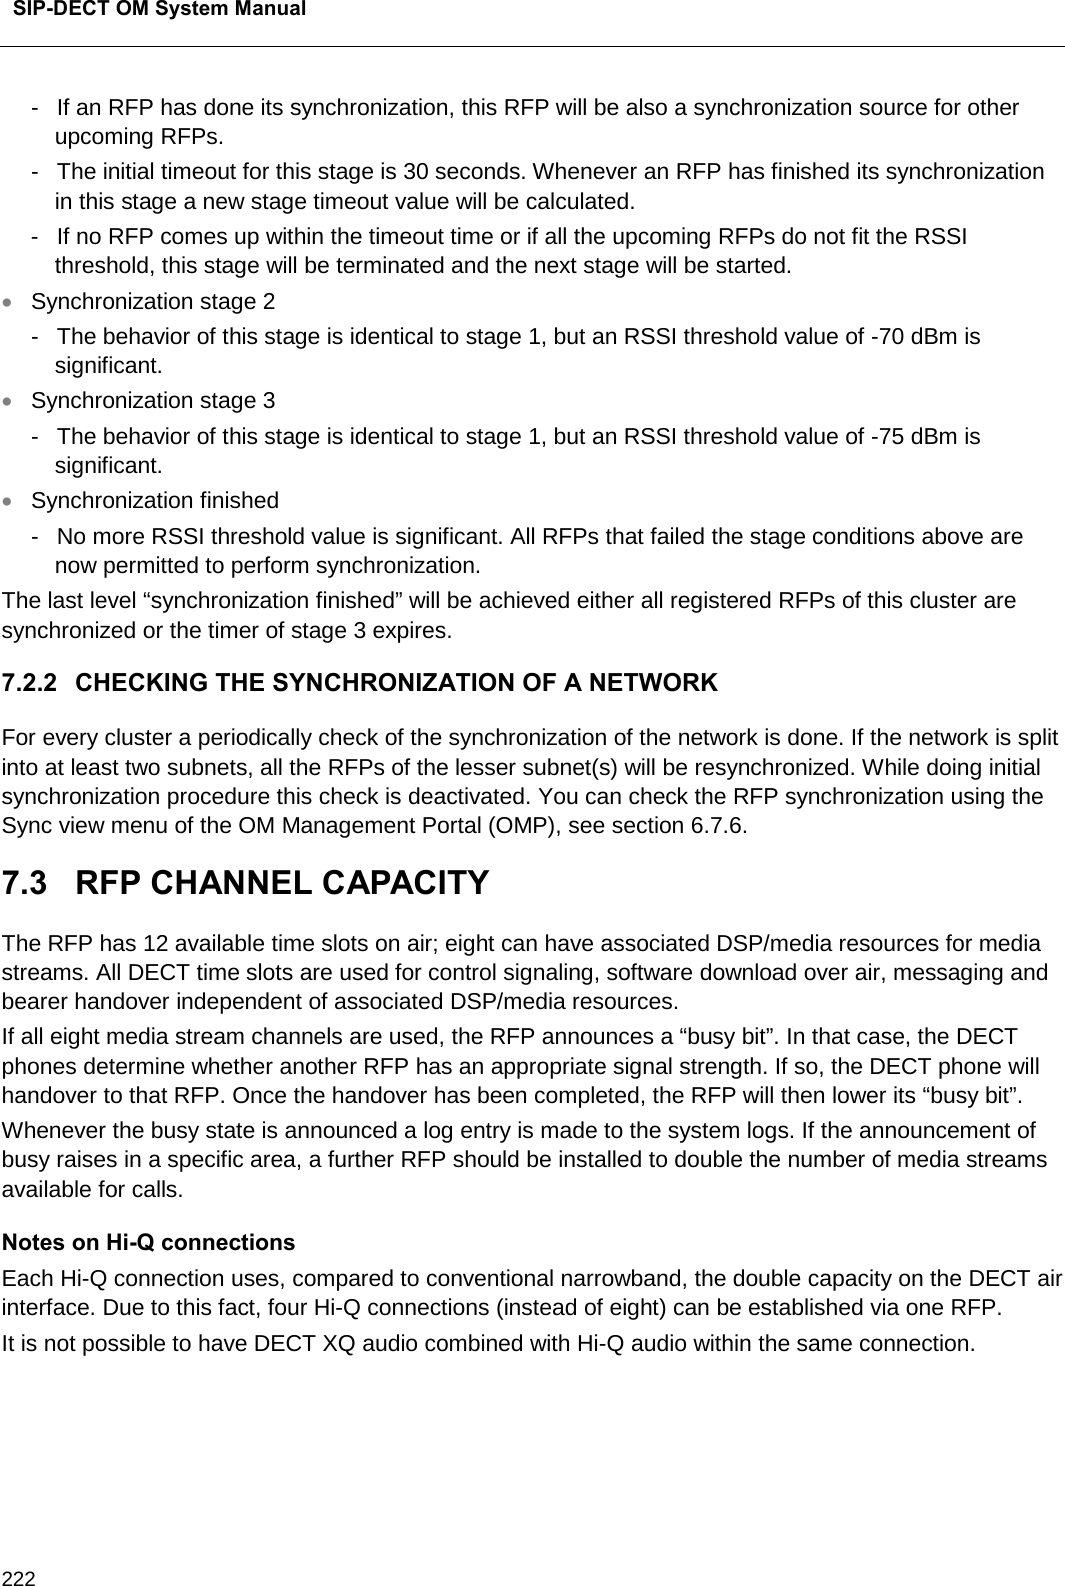  SIP-DECT OM System Manual    222 -  If an RFP has done its synchronization, this RFP will be also a synchronization source for other upcoming RFPs. -  The initial timeout for this stage is 30 seconds. Whenever an RFP has finished its synchronization in this stage a new stage timeout value will be calculated.  -  If no RFP comes up within the timeout time or if all the upcoming RFPs do not fit the RSSI threshold, this stage will be terminated and the next stage will be started. • Synchronization stage 2 -  The behavior of this stage is identical to stage 1, but an RSSI threshold value of -70 dBm is significant. • Synchronization stage 3 -  The behavior of this stage is identical to stage 1, but an RSSI threshold value of -75 dBm is significant. • Synchronization finished -  No more RSSI threshold value is significant. All RFPs that failed the stage conditions above are now permitted to perform synchronization. The last level “synchronization finished” will be achieved either all registered RFPs of this cluster are synchronized or the timer of stage 3 expires. 7.2.2 CHECKING THE SYNCHRONIZATION OF A NETWORK For every cluster a periodically check of the synchronization of the network is done. If the network is split into at least two subnets, all the RFPs of the lesser subnet(s) will be resynchronized. While doing initial synchronization procedure this check is deactivated. You can check the RFP synchronization using the Sync view menu of the OM Management Portal (OMP), see section 6.7.6. 7.3  RFP CHANNEL CAPACITY The RFP has 12 available time slots on air; eight can have associated DSP/media resources for media streams. All DECT time slots are used for control signaling, software download over air, messaging and bearer handover independent of associated DSP/media resources. If all eight media stream channels are used, the RFP announces a “busy bit”. In that case, the DECT phones determine whether another RFP has an appropriate signal strength. If so, the DECT phone will handover to that RFP. Once the handover has been completed, the RFP will then lower its “busy bit”. Whenever the busy state is announced a log entry is made to the system logs. If the announcement of busy raises in a specific area, a further RFP should be installed to double the number of media streams available for calls. Notes on Hi-Q connections Each Hi-Q connection uses, compared to conventional narrowband, the double capacity on the DECT air interface. Due to this fact, four Hi-Q connections (instead of eight) can be established via one RFP. It is not possible to have DECT XQ audio combined with Hi-Q audio within the same connection.    